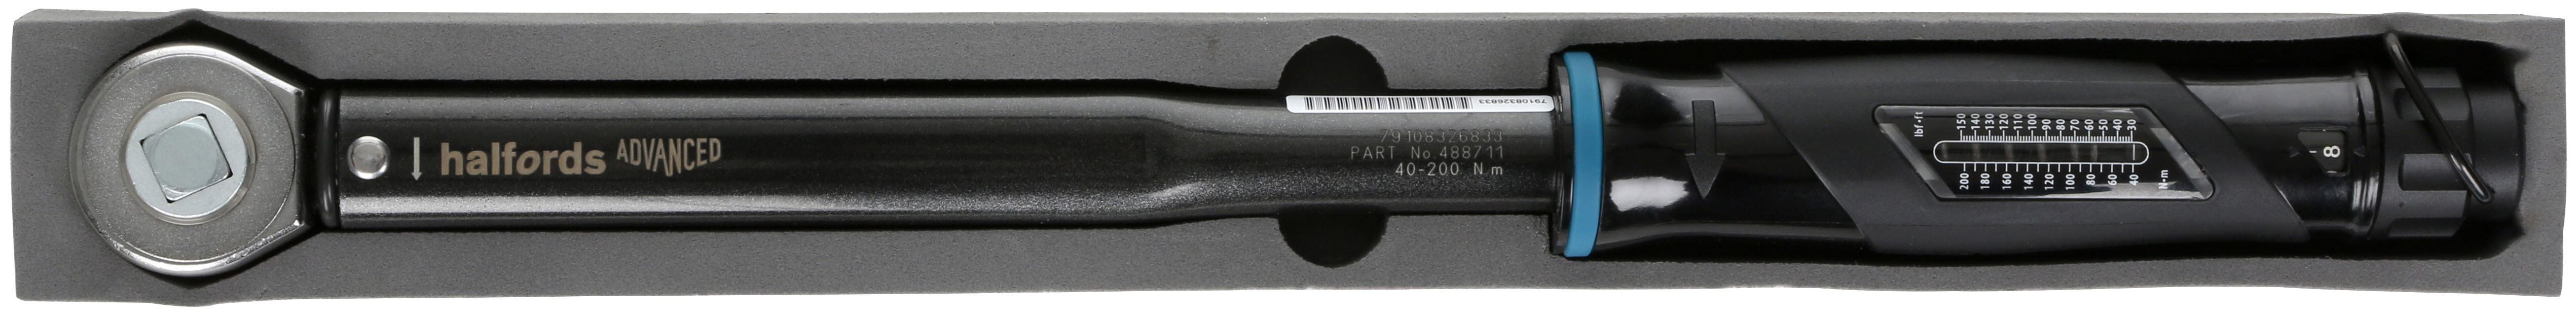 Halfords Advanced Torque Wrench Model 200